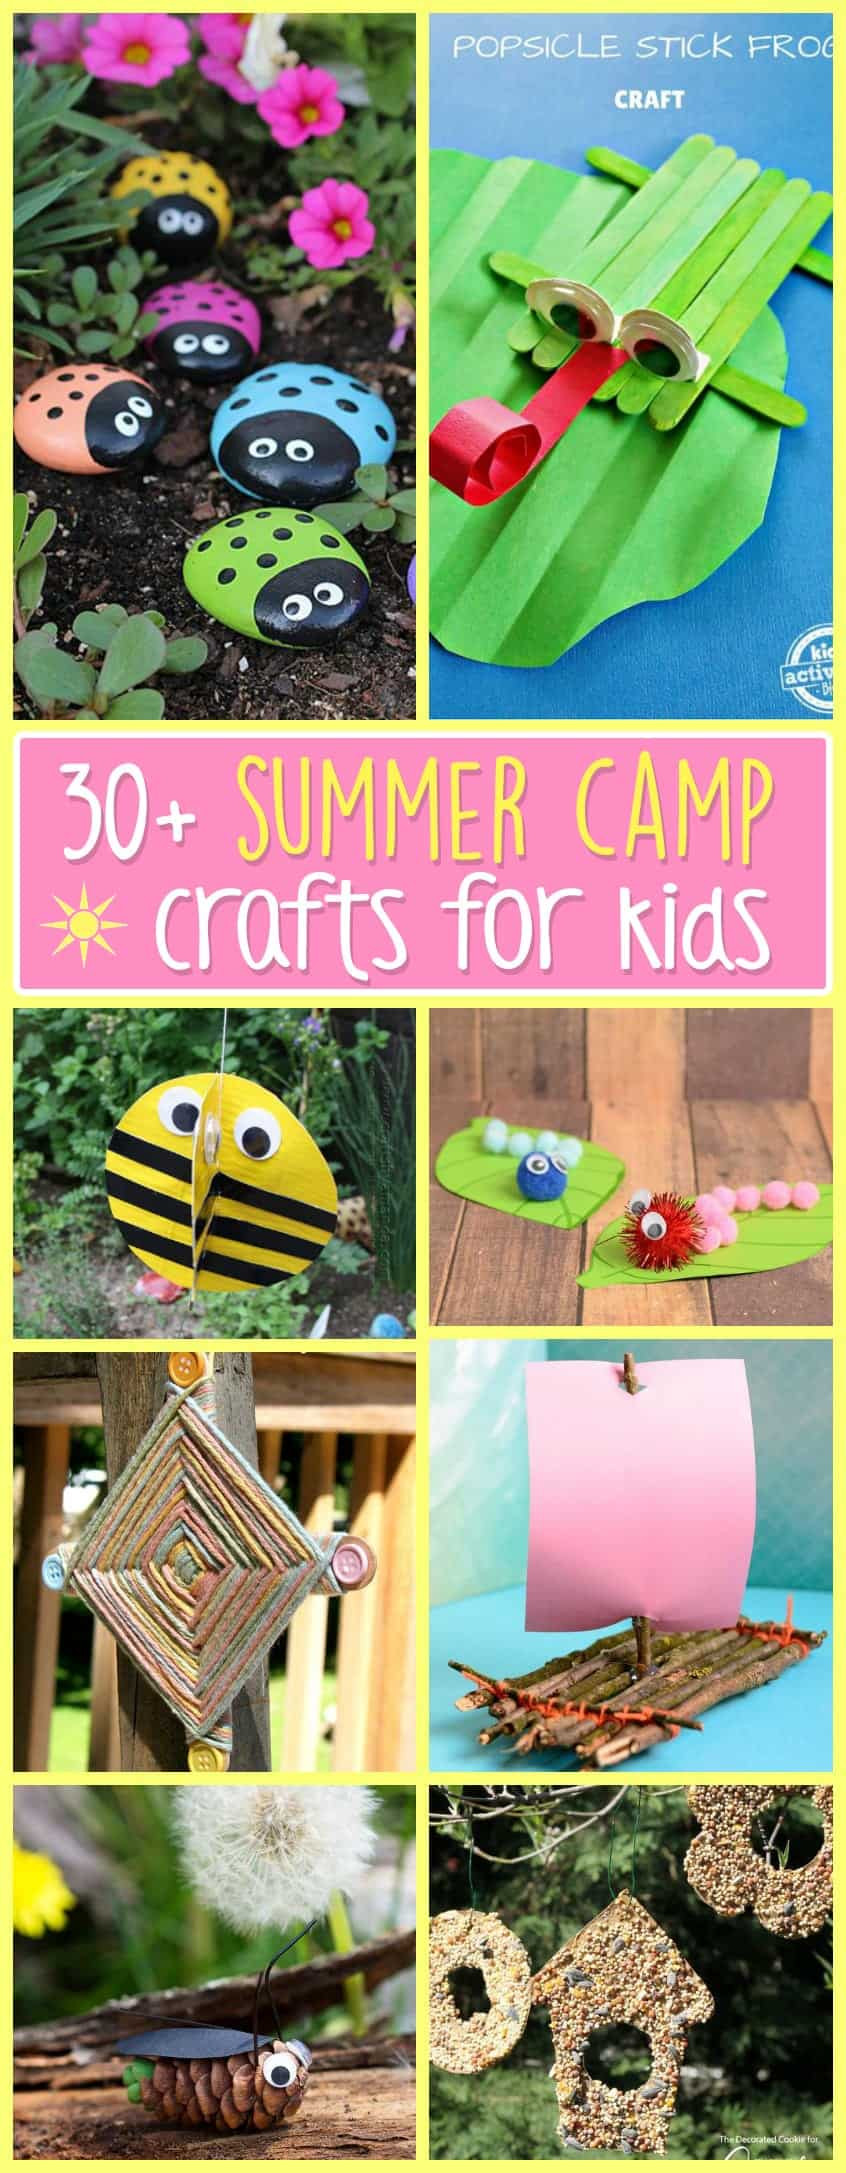 Summer Craft For Toddlers
 Summer Camp Crafts for Kids 30 ideas for a fun camp